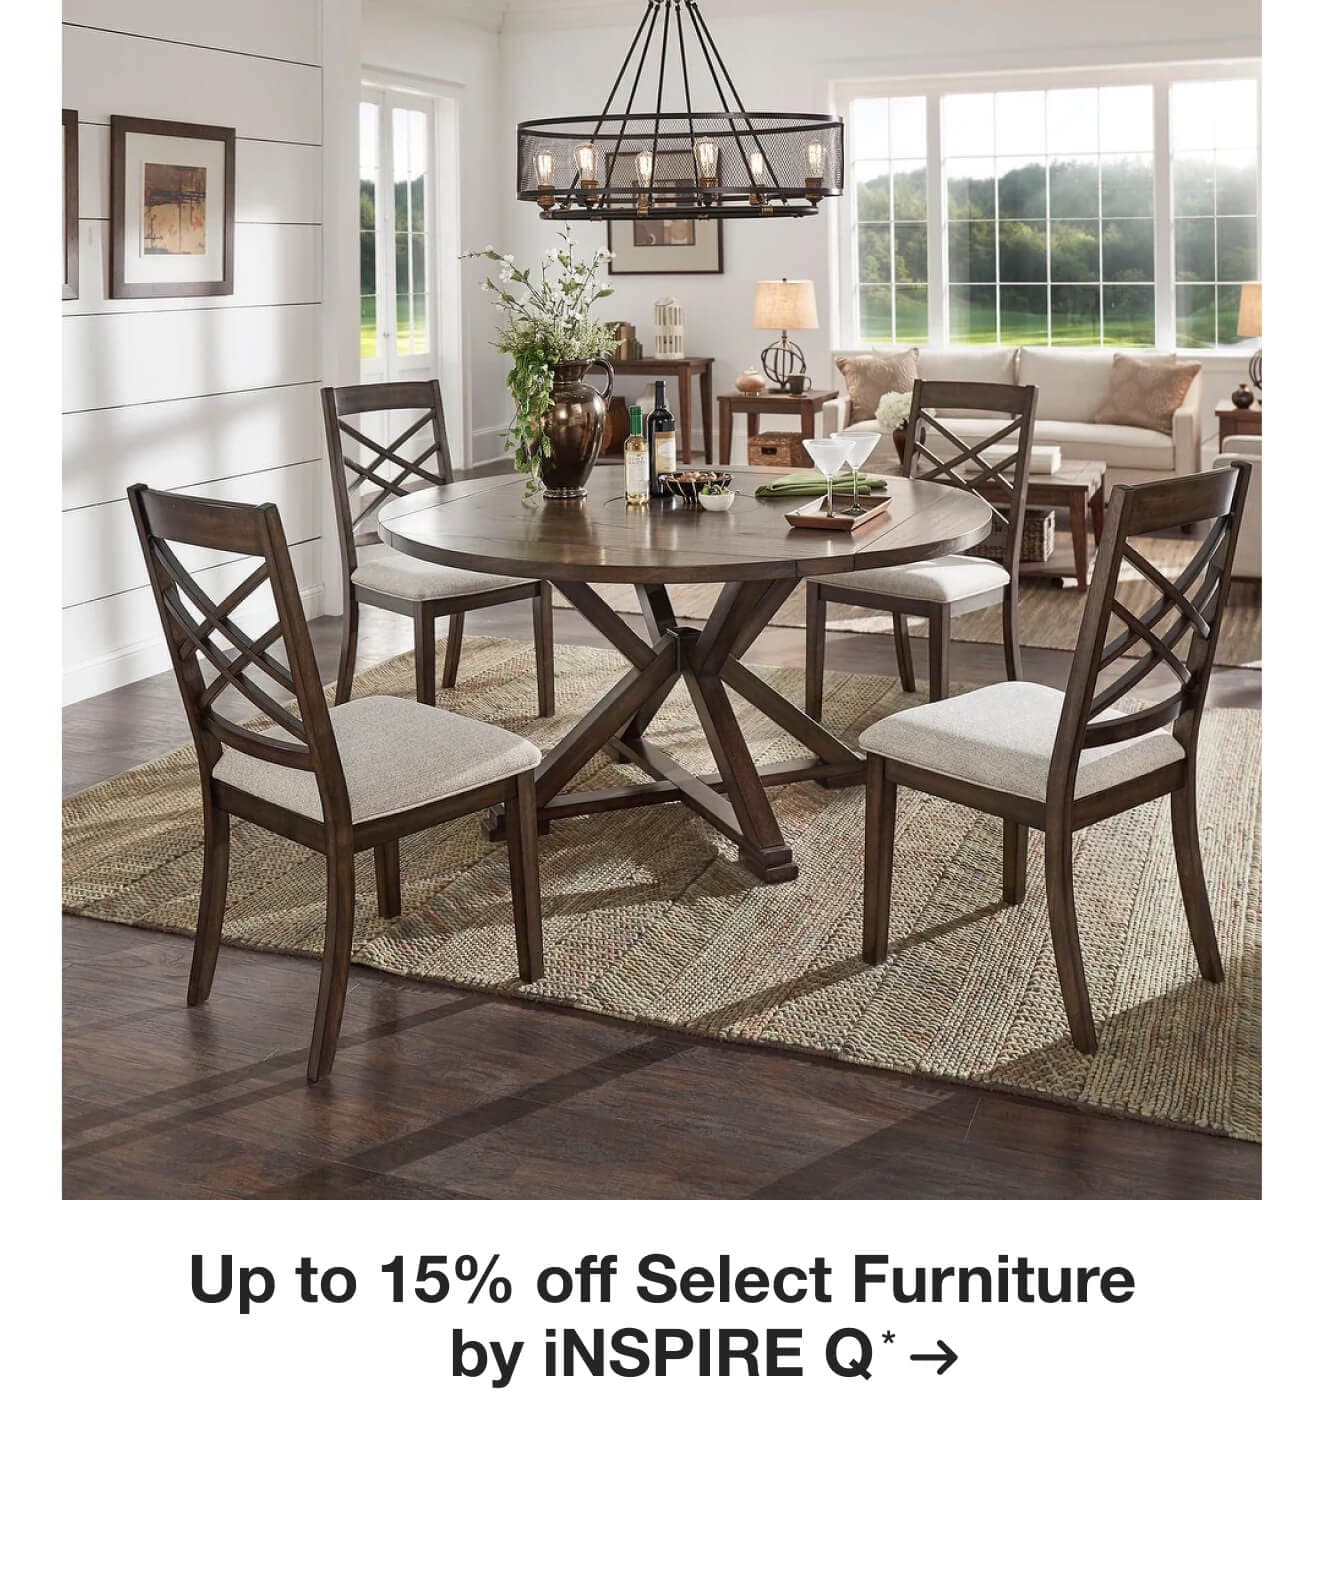 Up to 15% off Select Furniture by iNSPIRE Q*